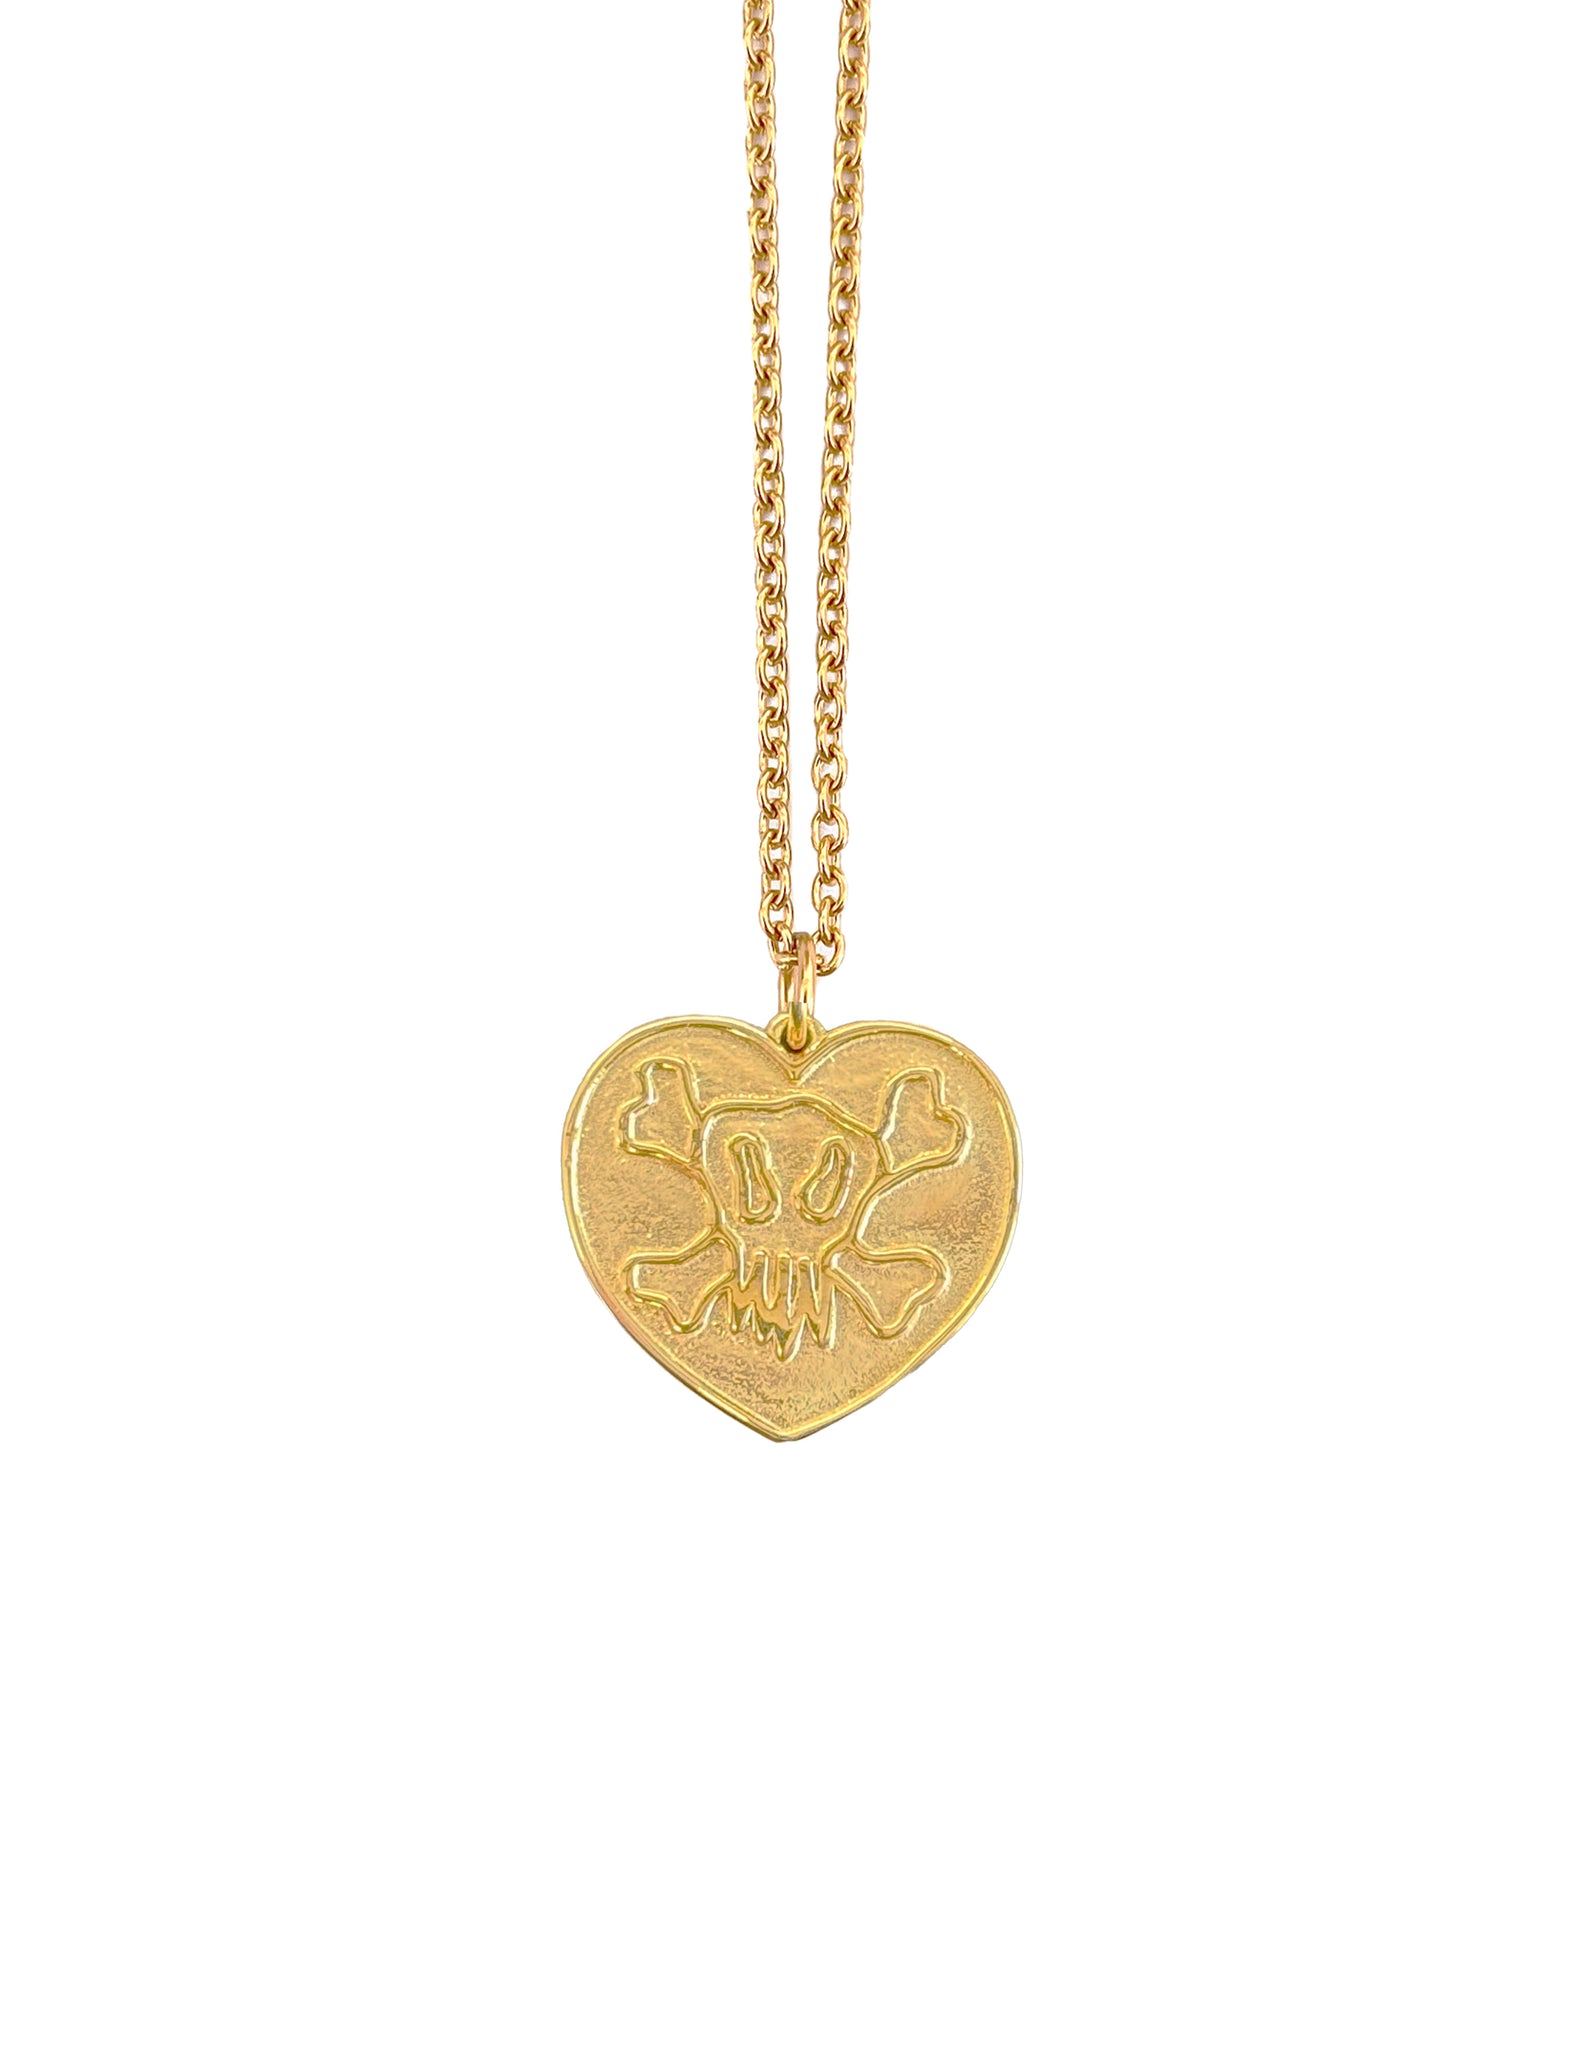 GOLD LOVE AND DEATH NECKLACE